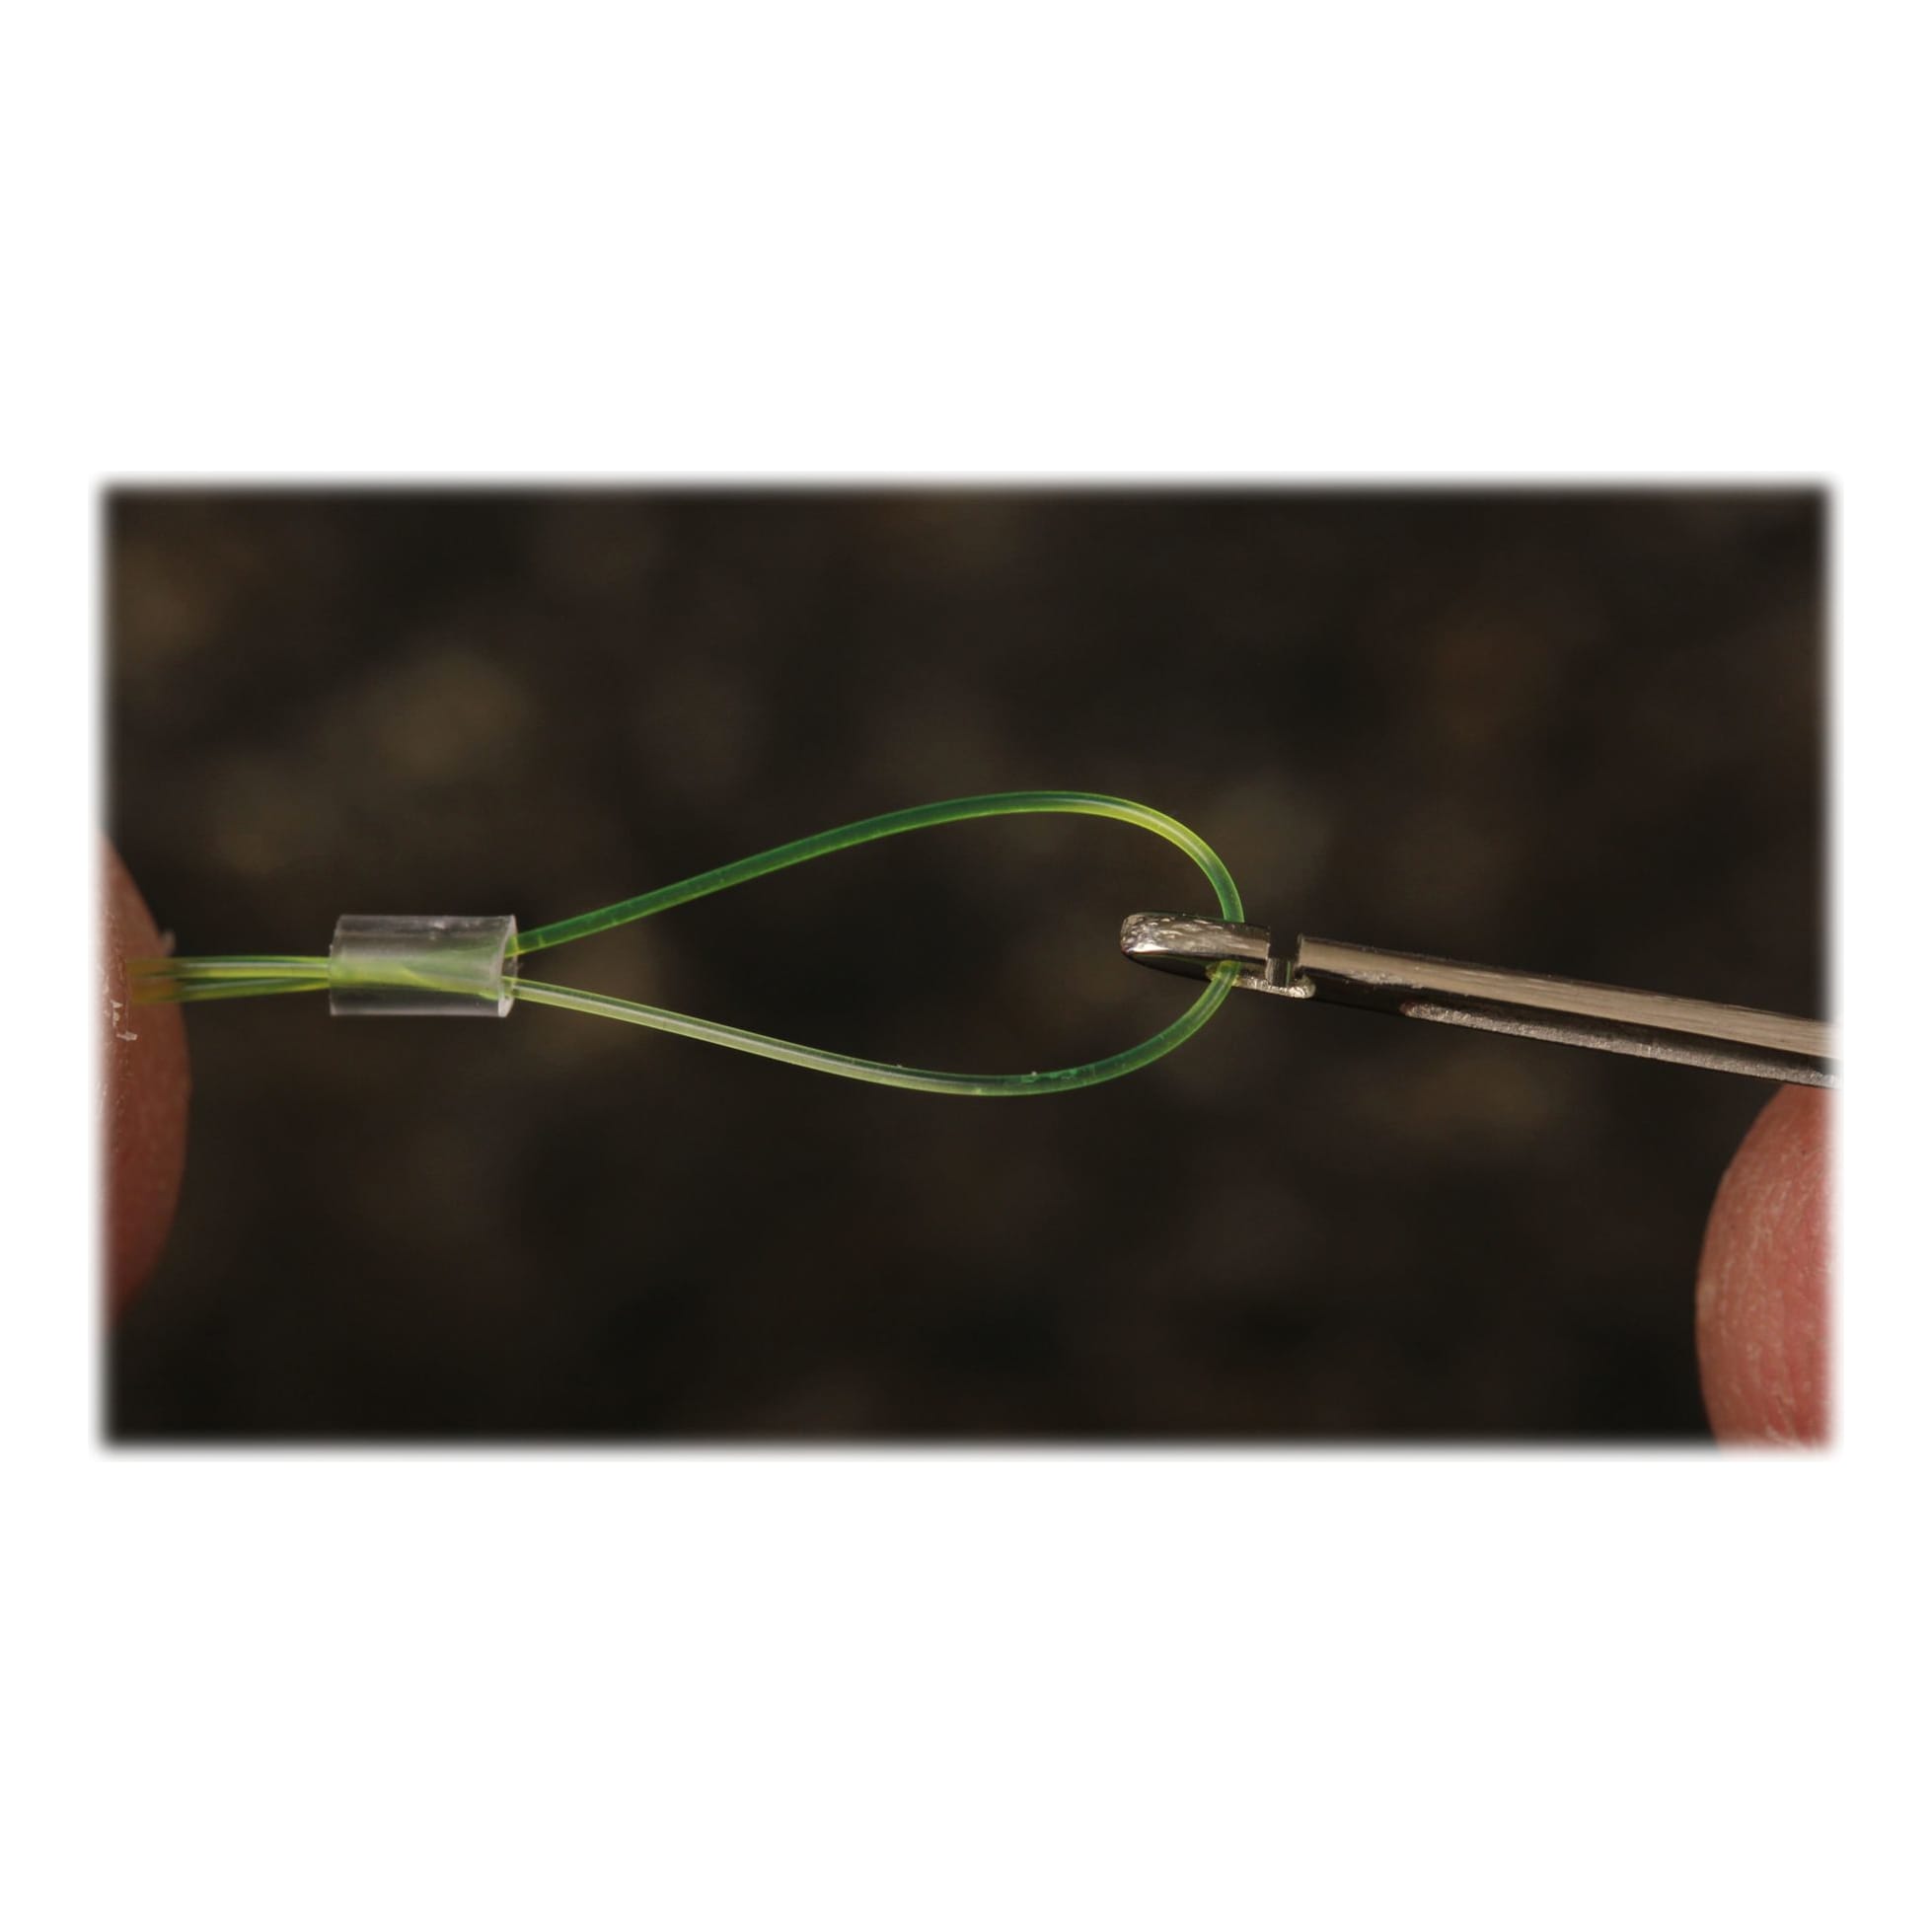 Phil Rowley Ball Style Quick-Release Indicators - Cabelas - PHIL